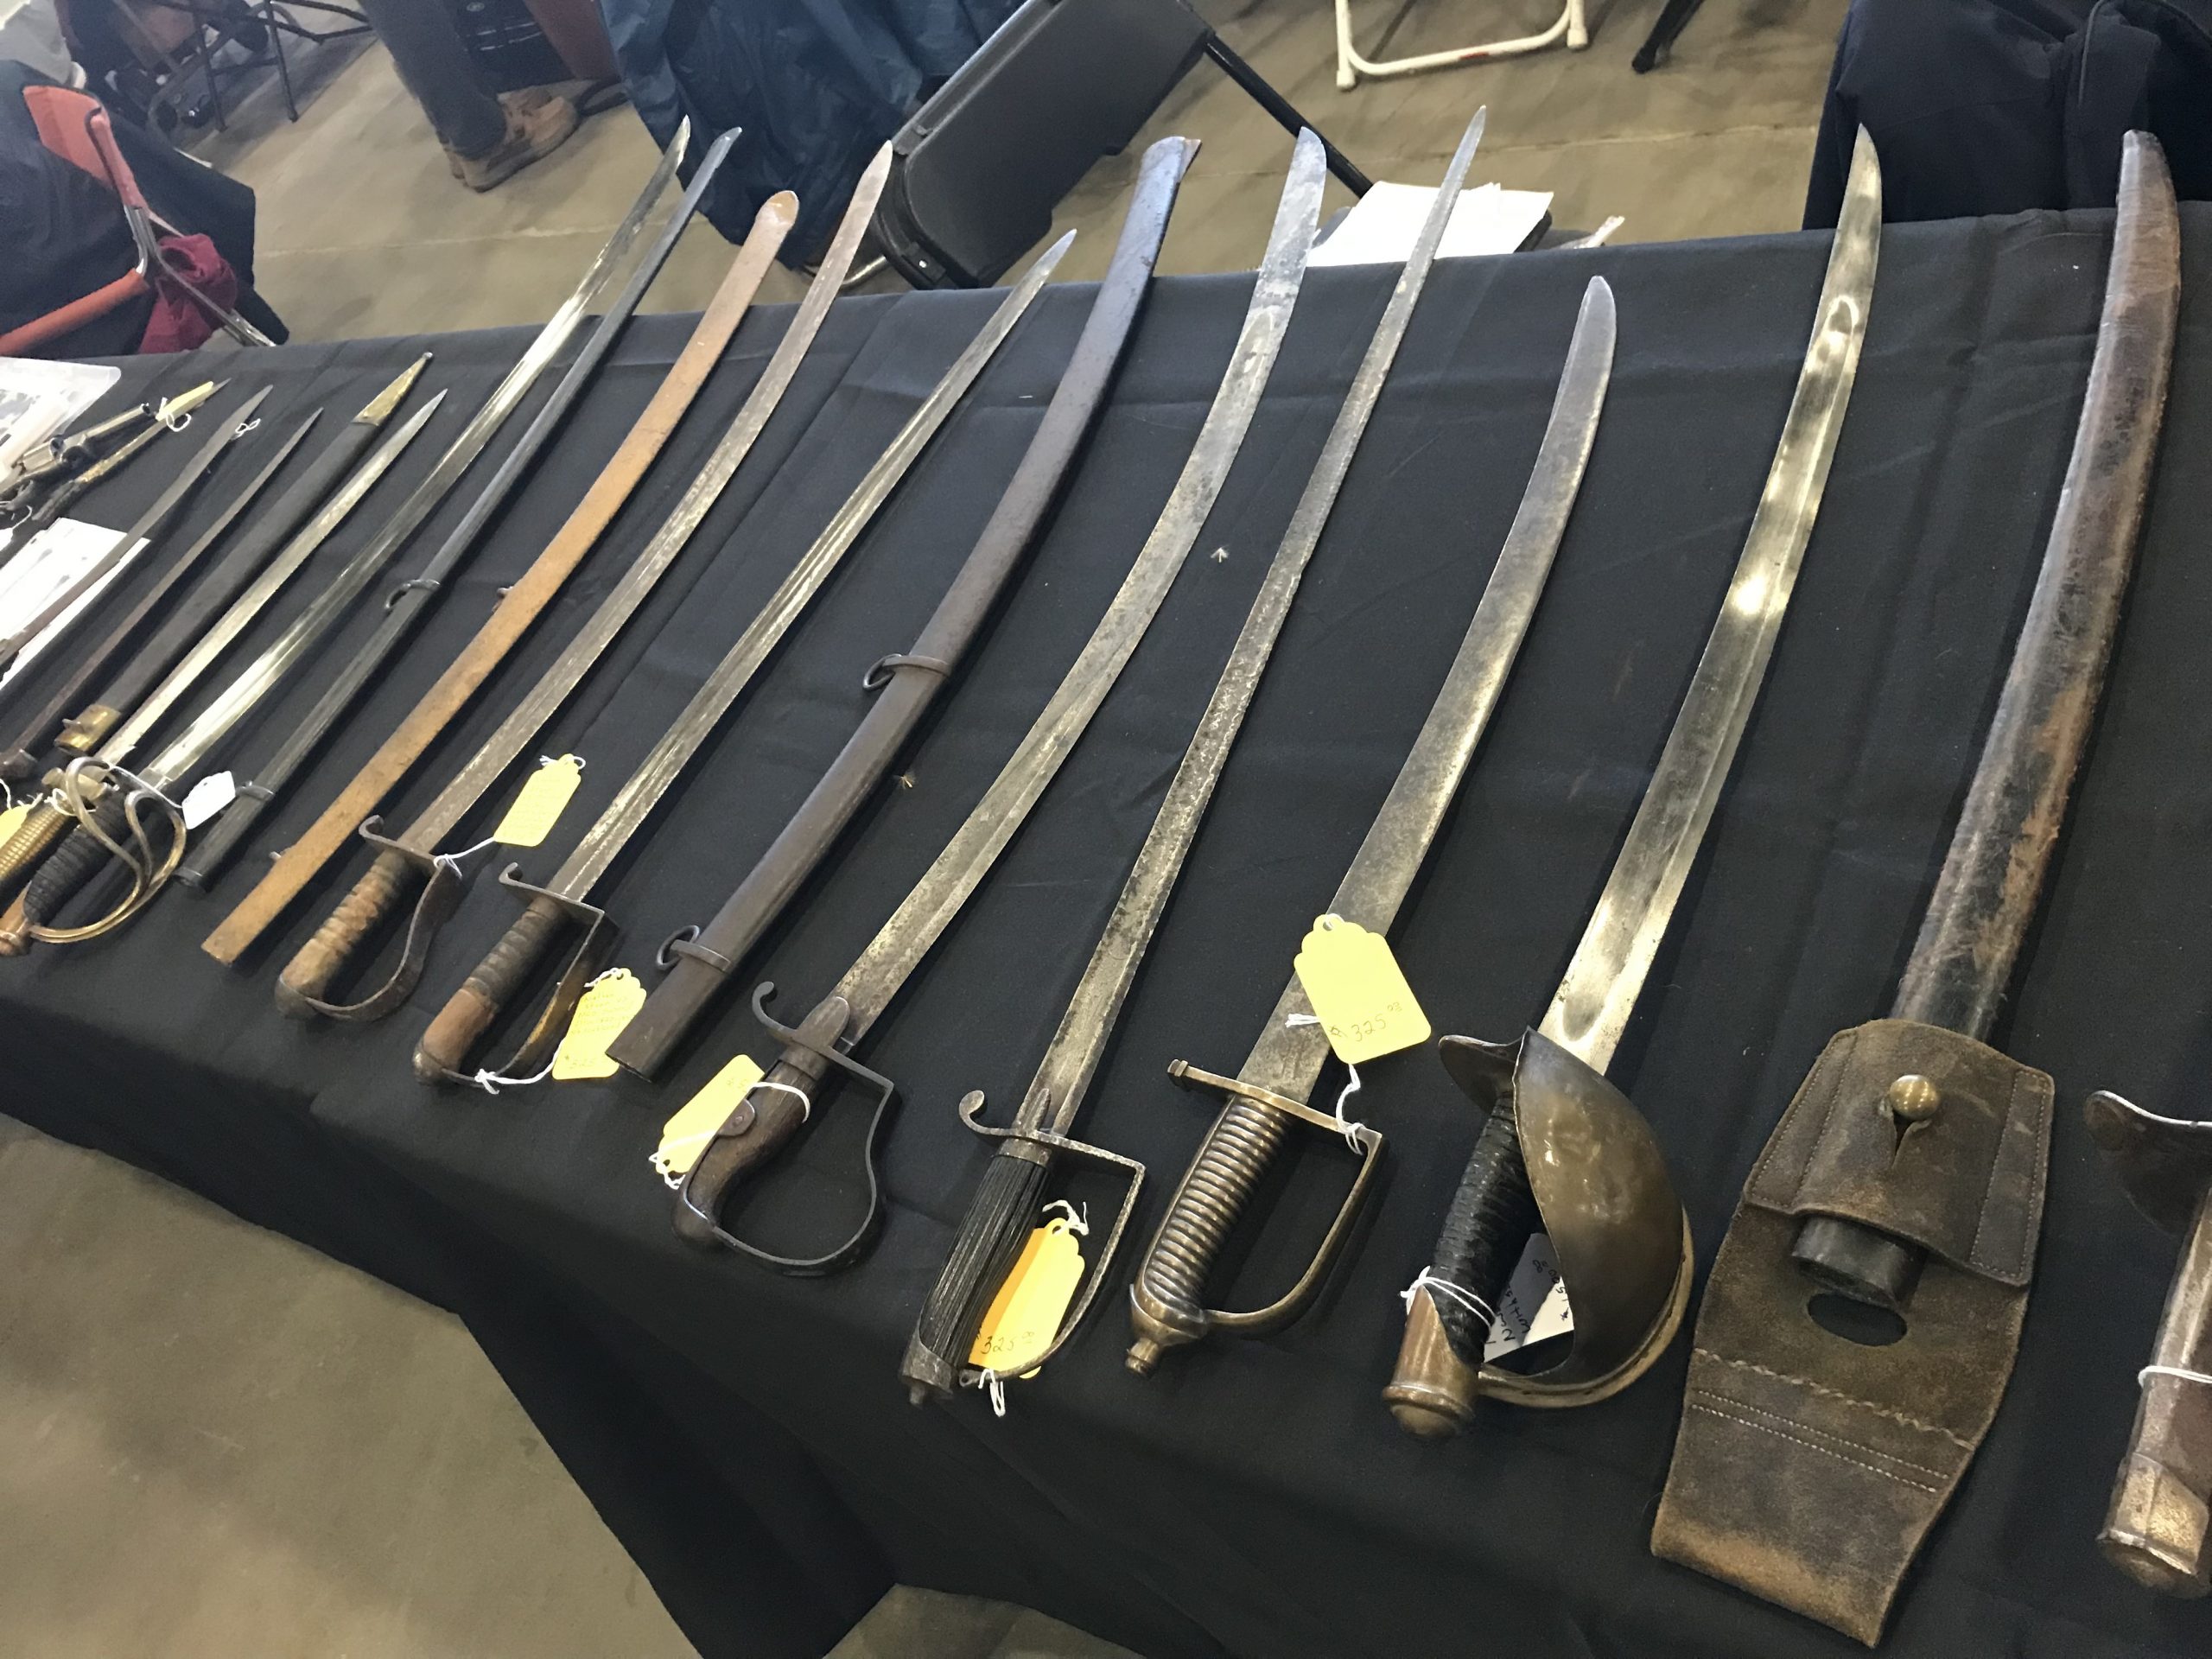 The Tulsa show is big enough to attract the sword collectors, too. Lots of history on display.